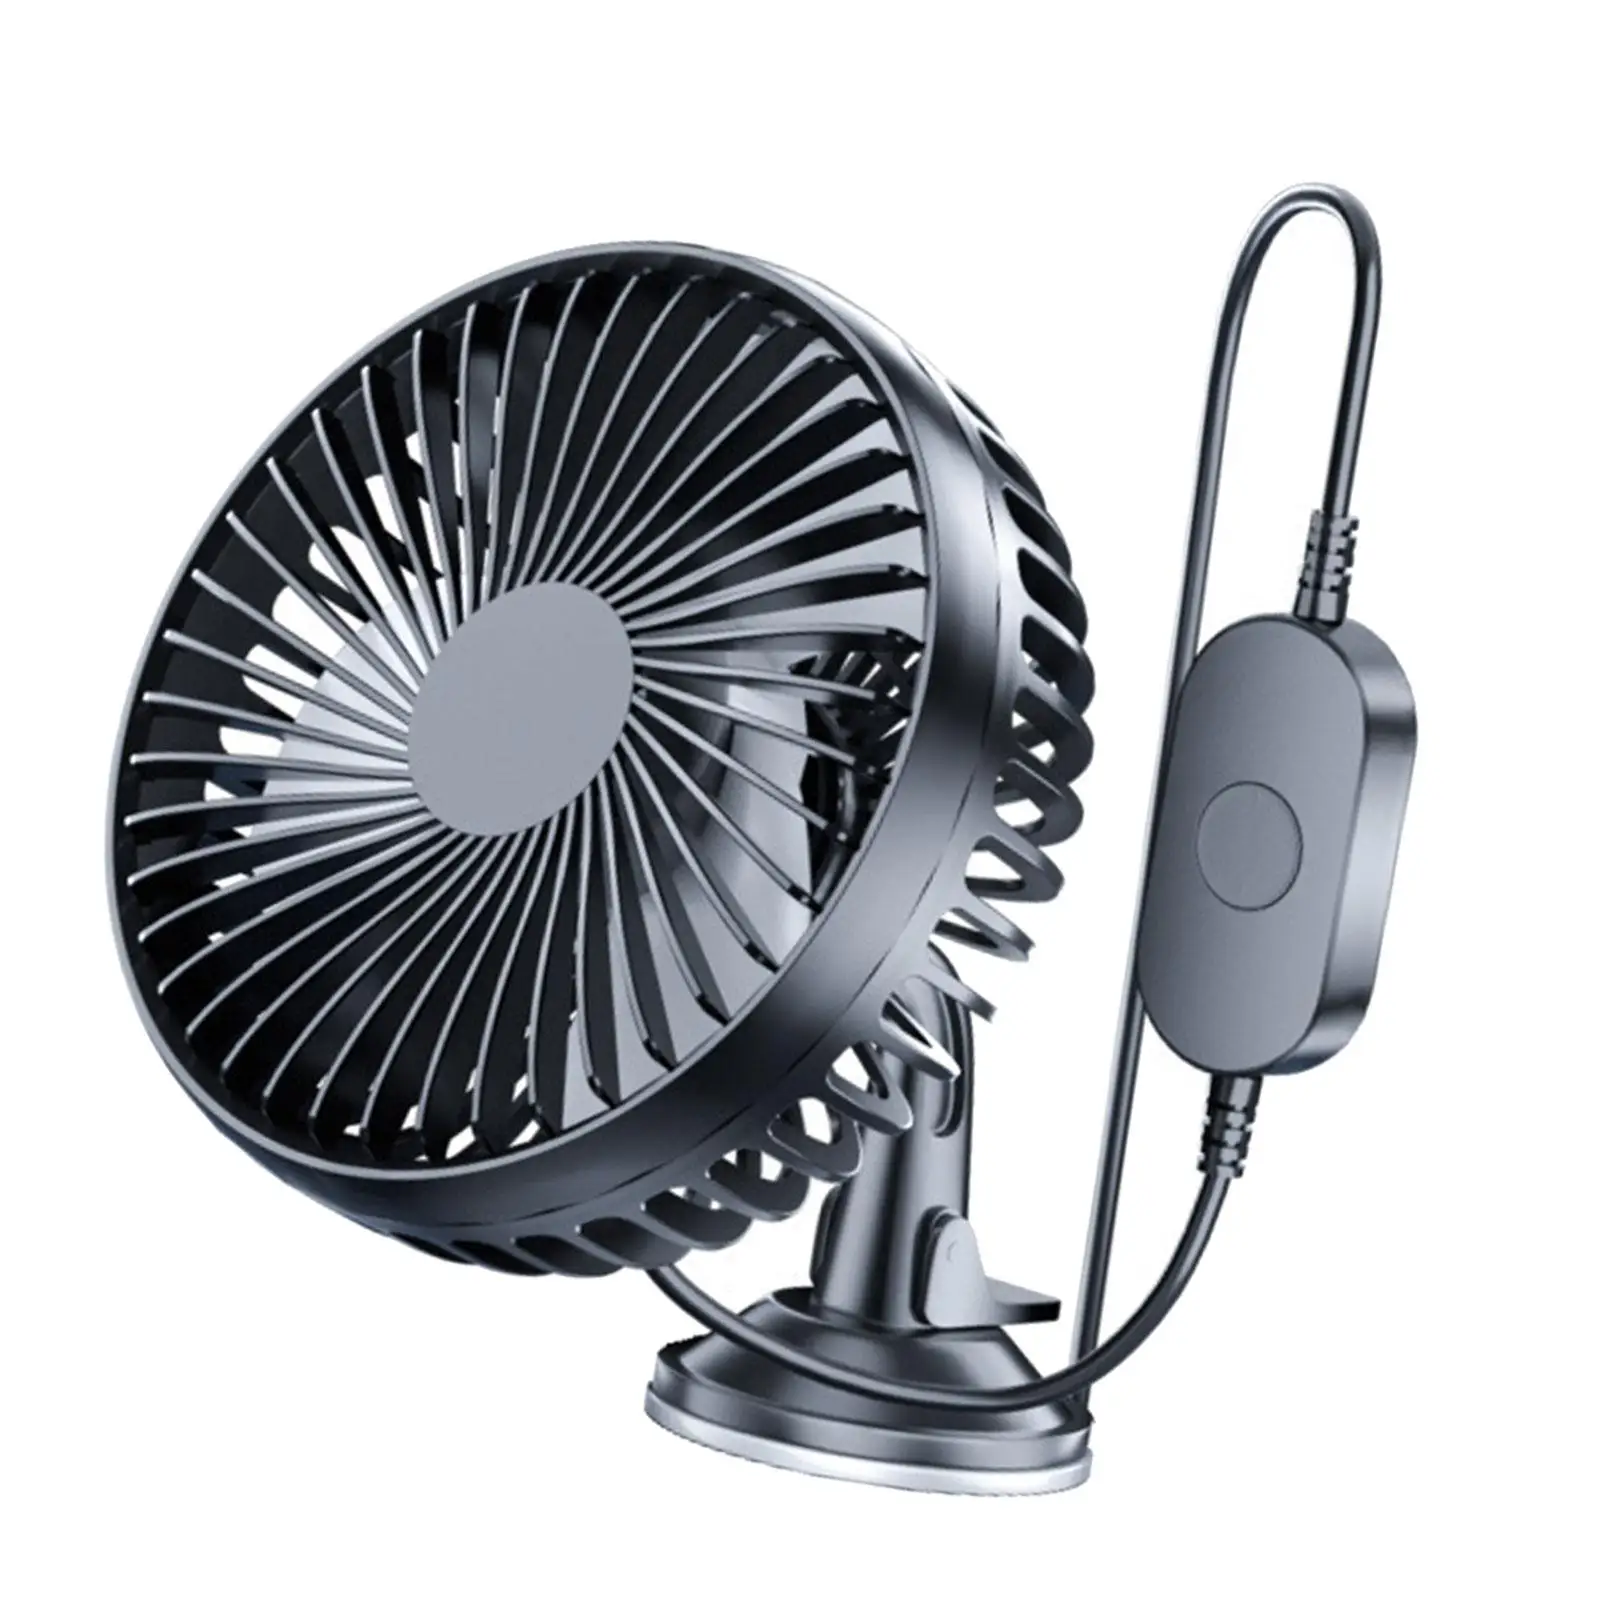 Electric Car Cooling Fan 12V 24V USB for Automobile Office and Home Use Accessories Lightweight Sturdy Tilt Adjustment 3 Speed